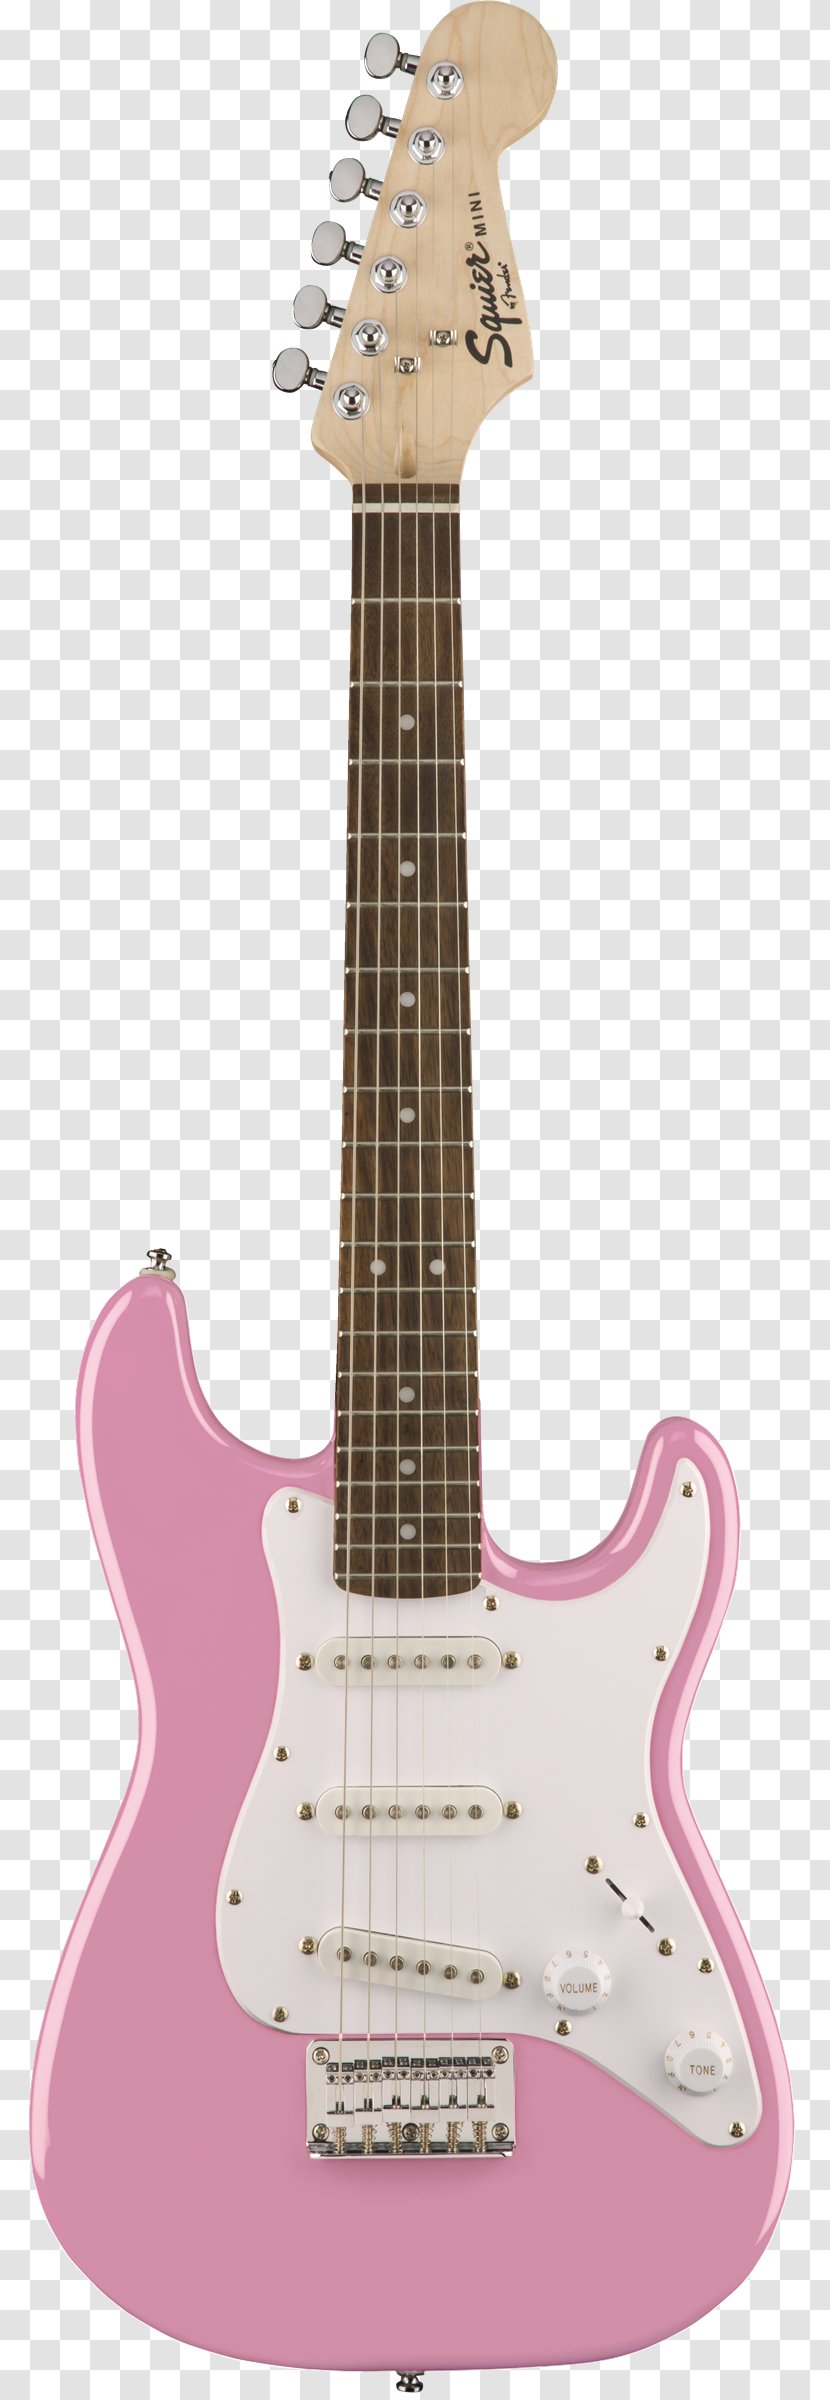 Fender Stratocaster Bullet Squier Deluxe Hot Rails Hello Kitty - Silhouette - Guitar Transparent PNG